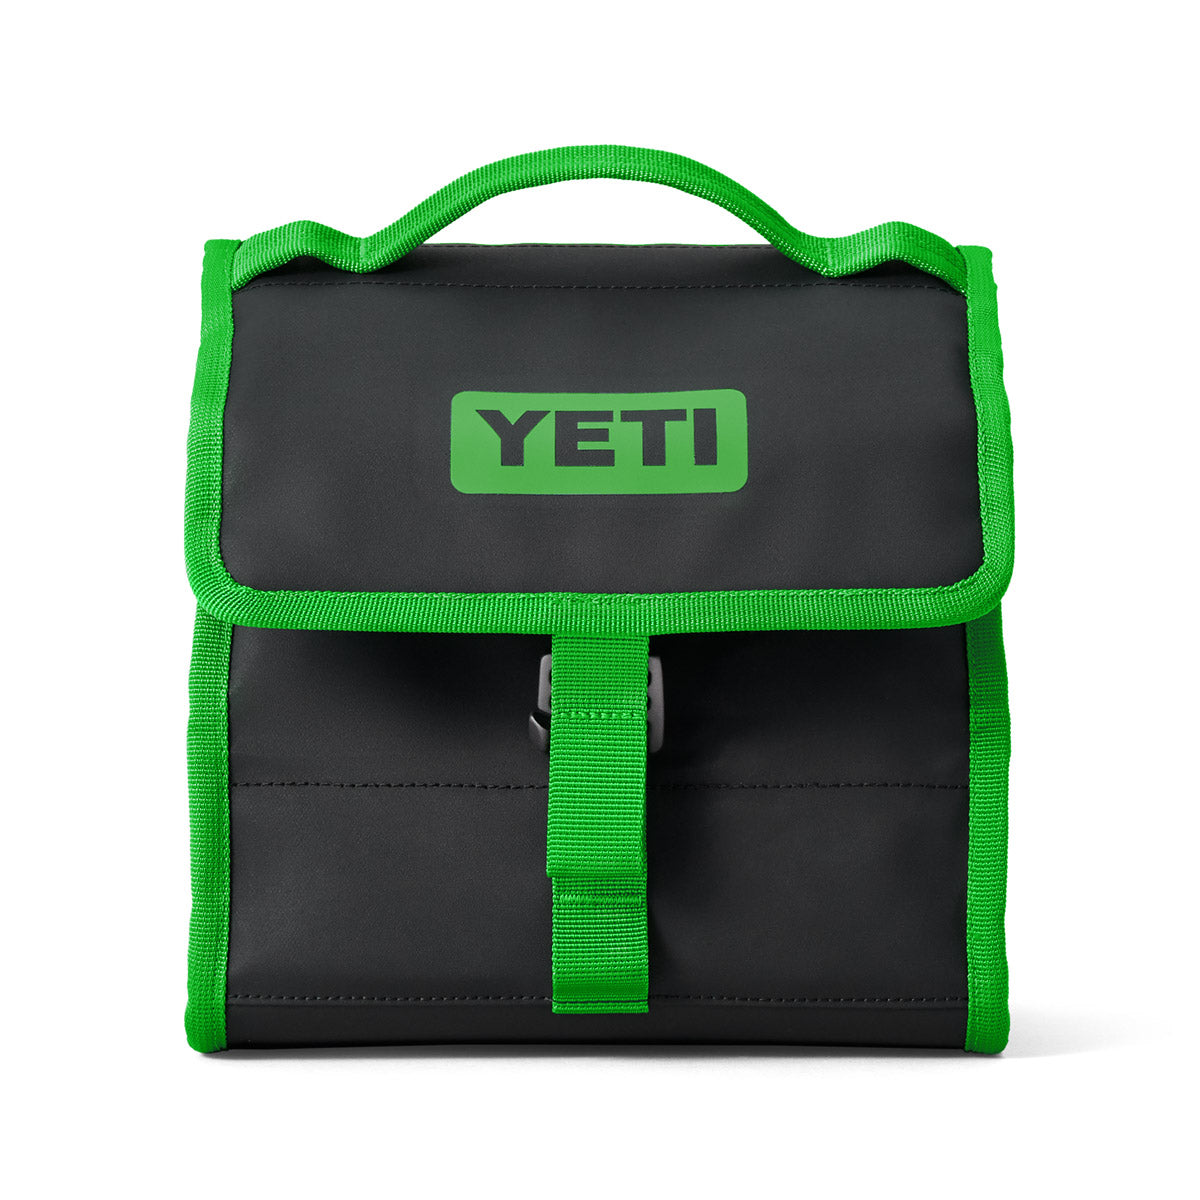 https://cdn.shopify.com/s/files/1/0602/4842/4680/files/site_studio_Soft_Coolers_Daytrip_Lunch_Bag_Canopy_Green_Front_Closed_10966_Primary_B_2400x2400_d63d99d0-dbe1-4492-ae89-dbb145730b96_1600x.jpg?v=1687980176